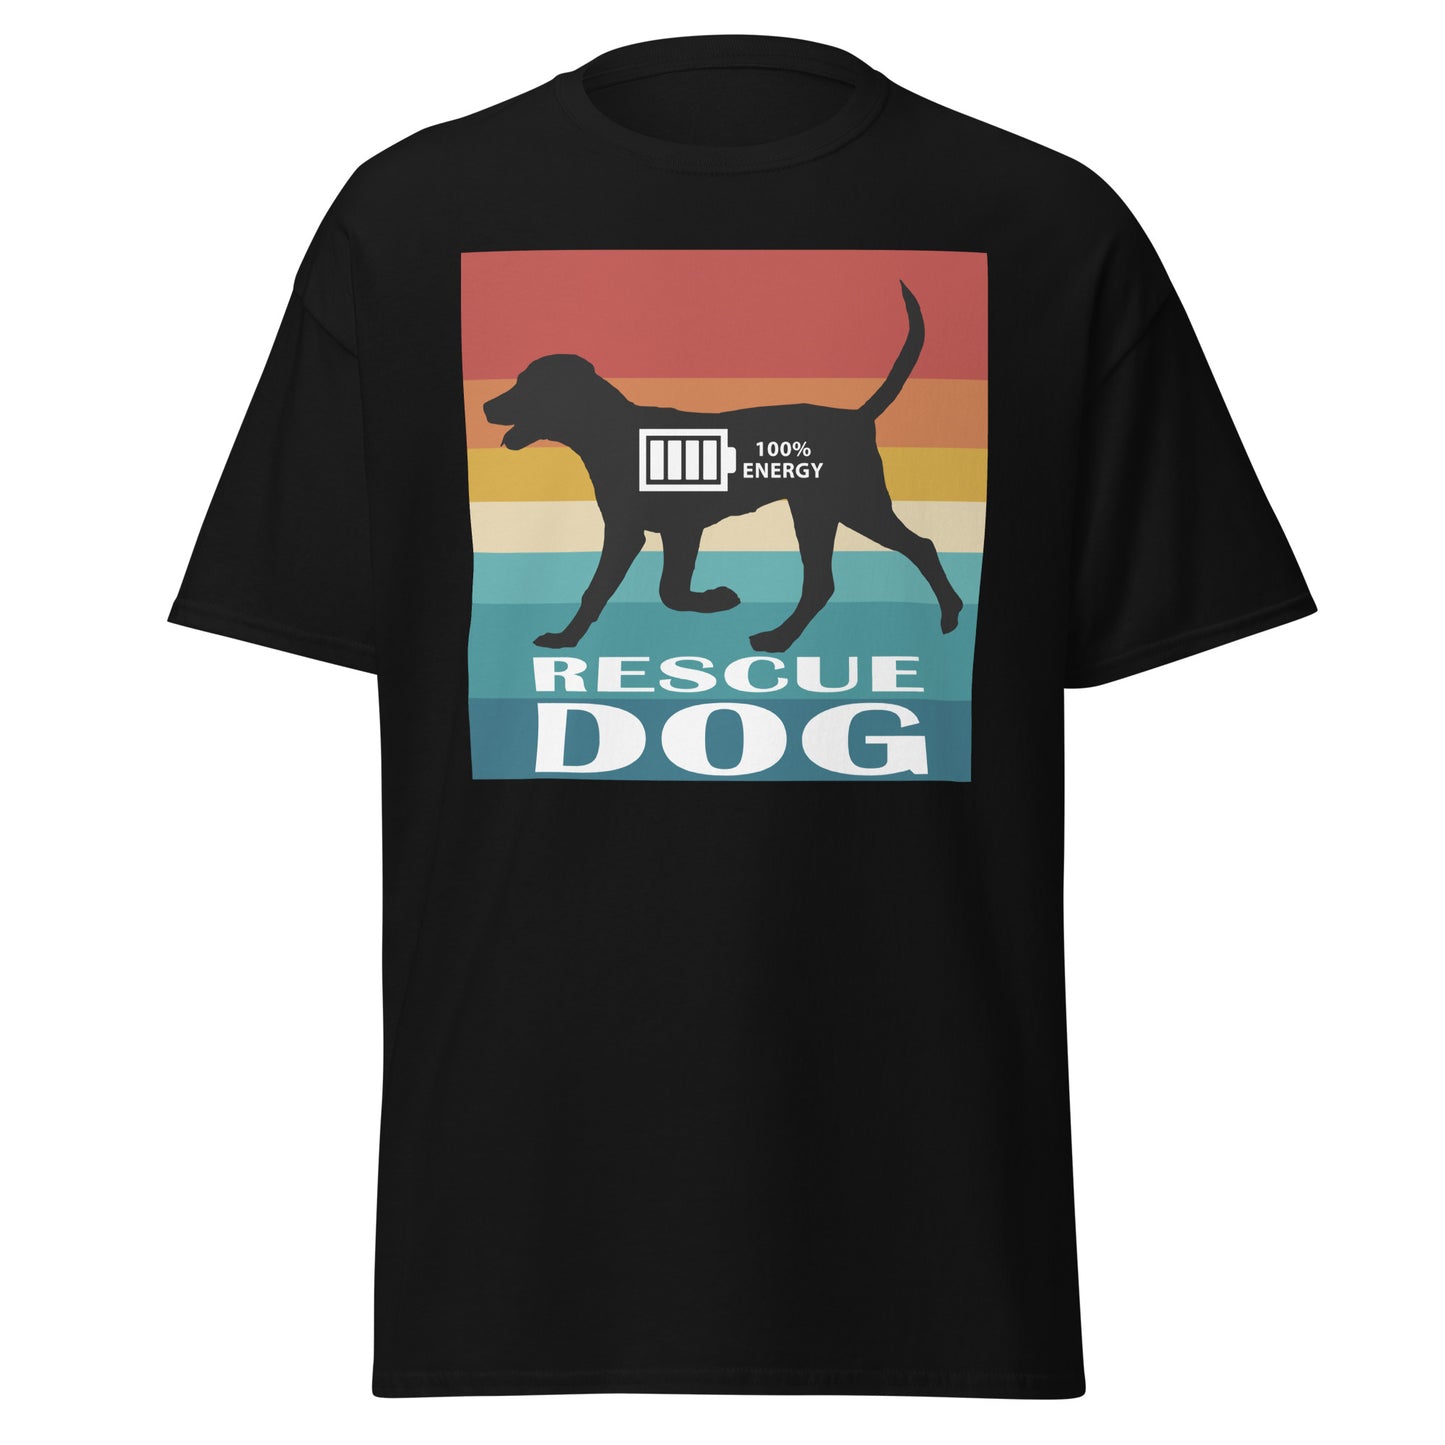 Rescue Dog 100% Energy Men's classic tee by Dog Artistry